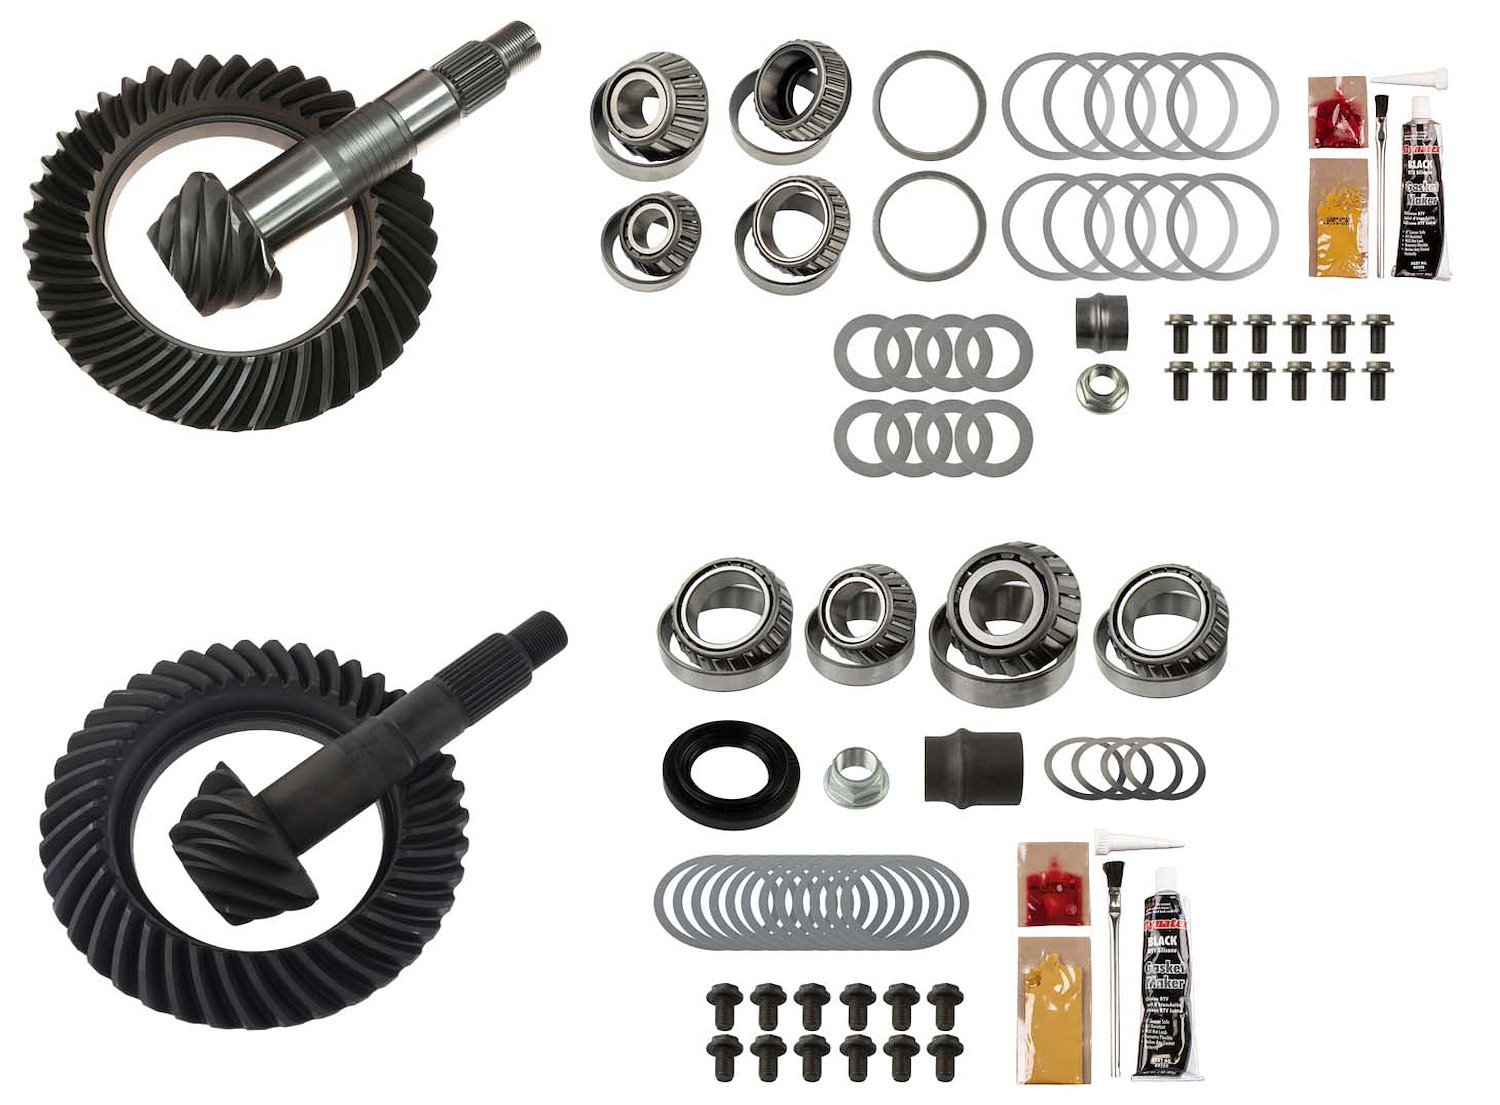 Complete Front and Rear Ring and Pinion Kit 2007-2020 Toyota Tacoma - 4.88 Ratio